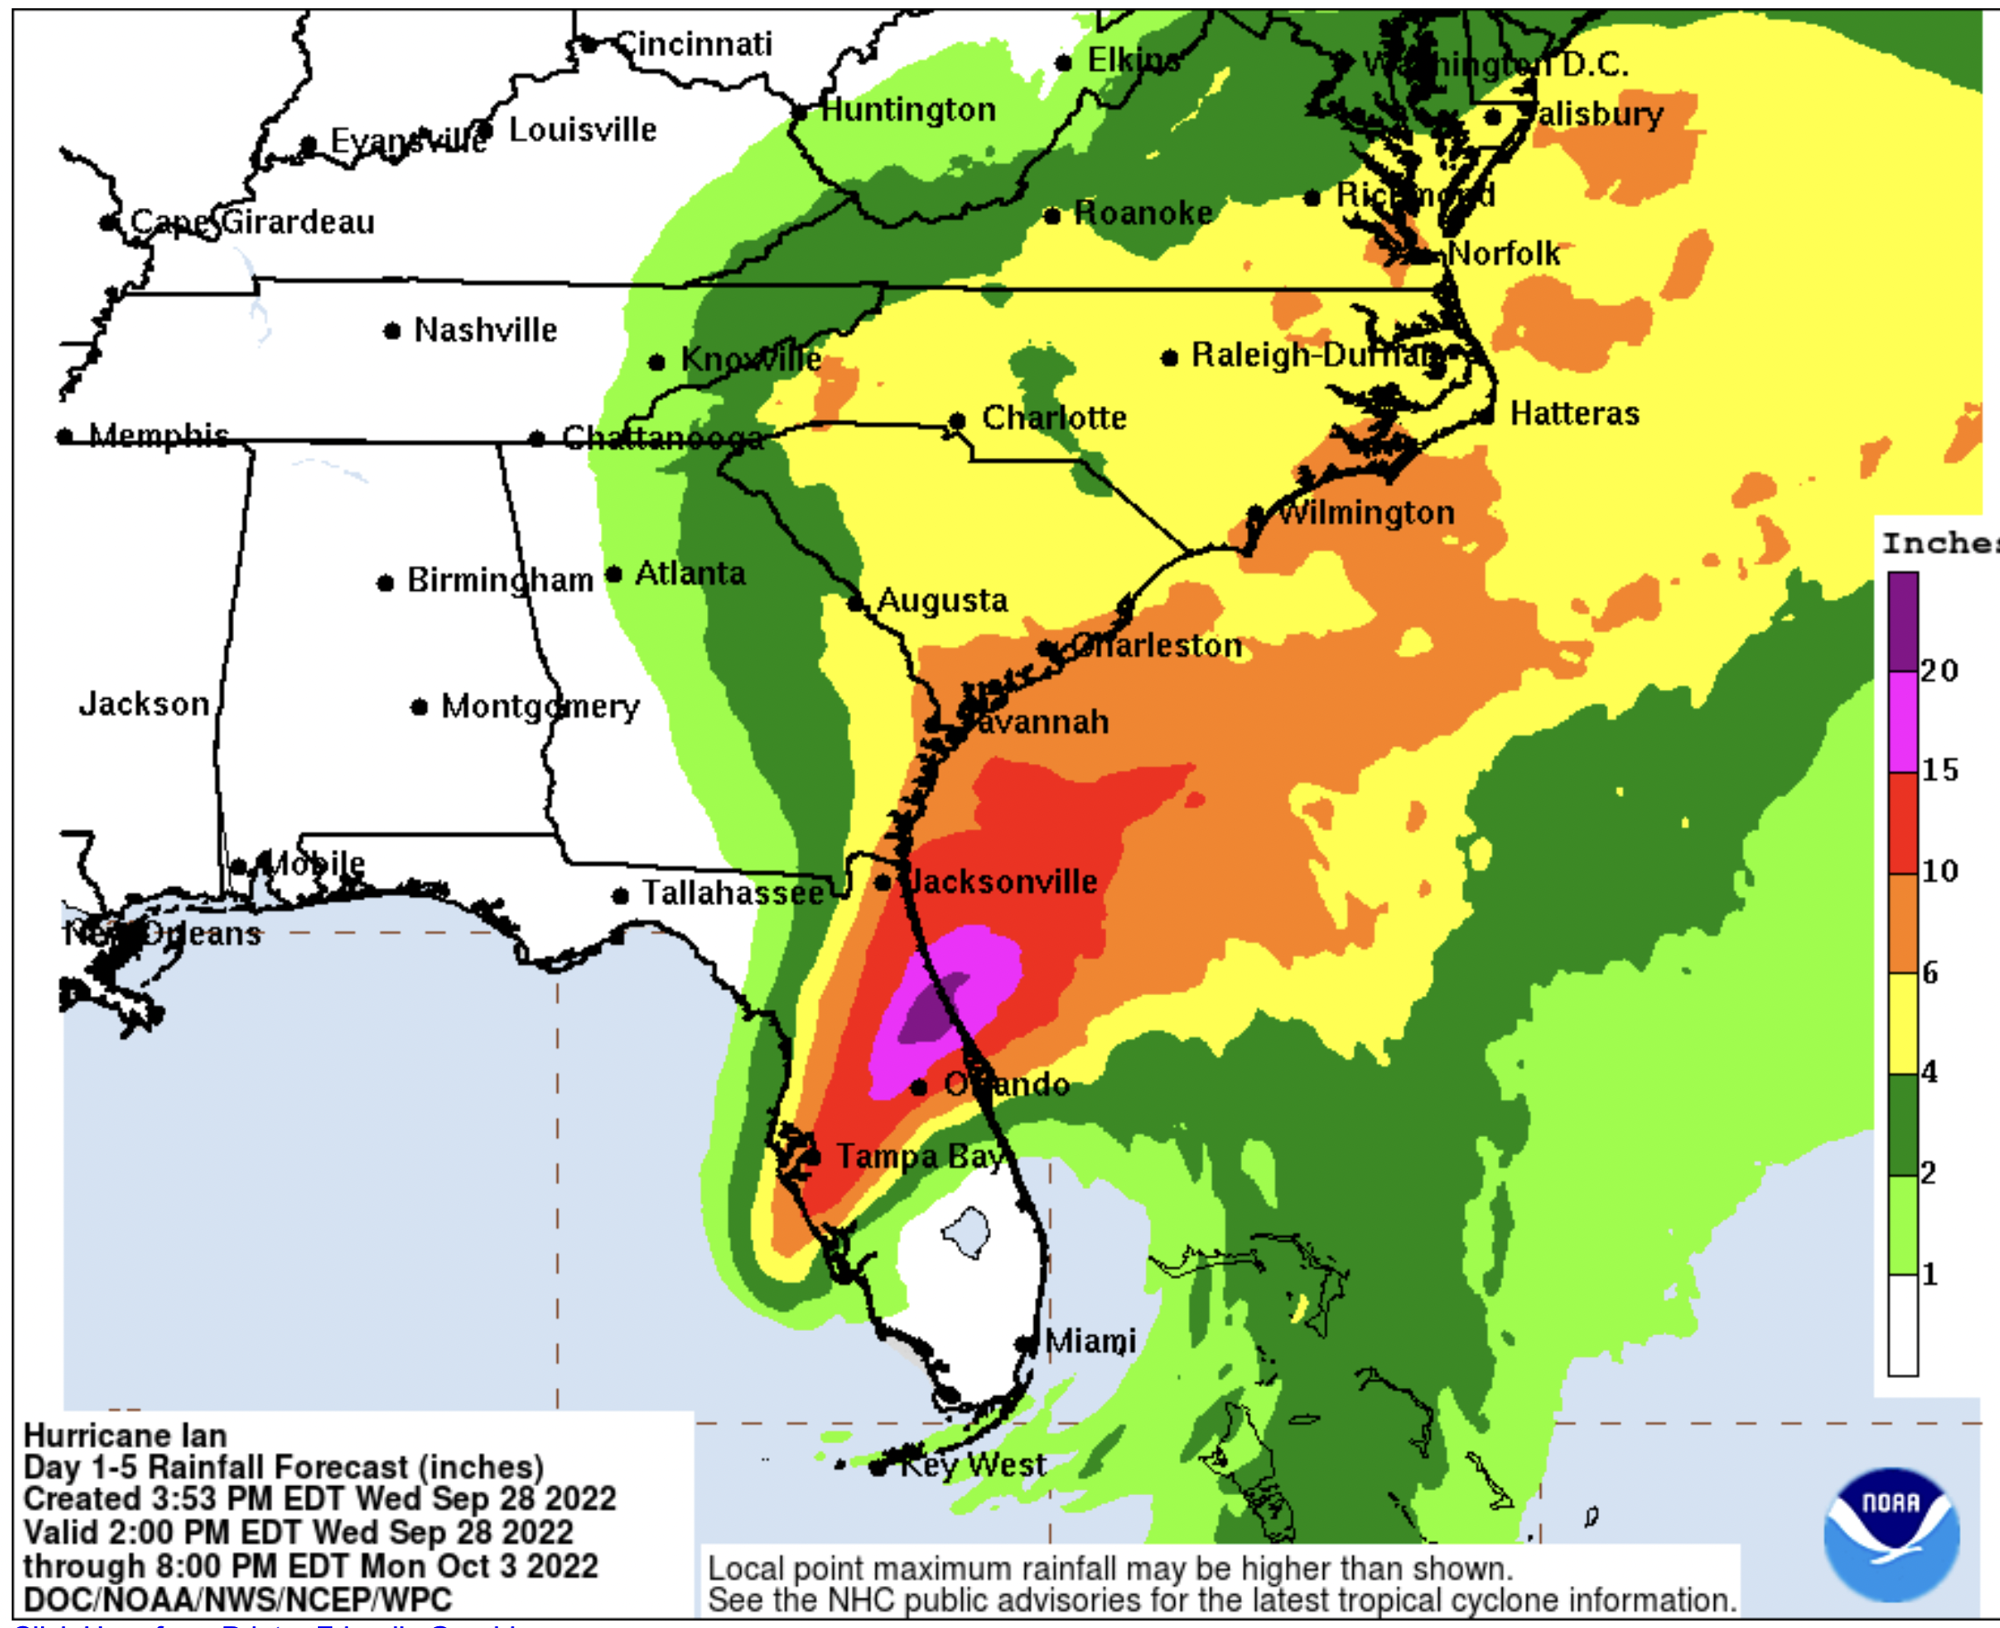 Rainfall projections from the National Hurricane Center